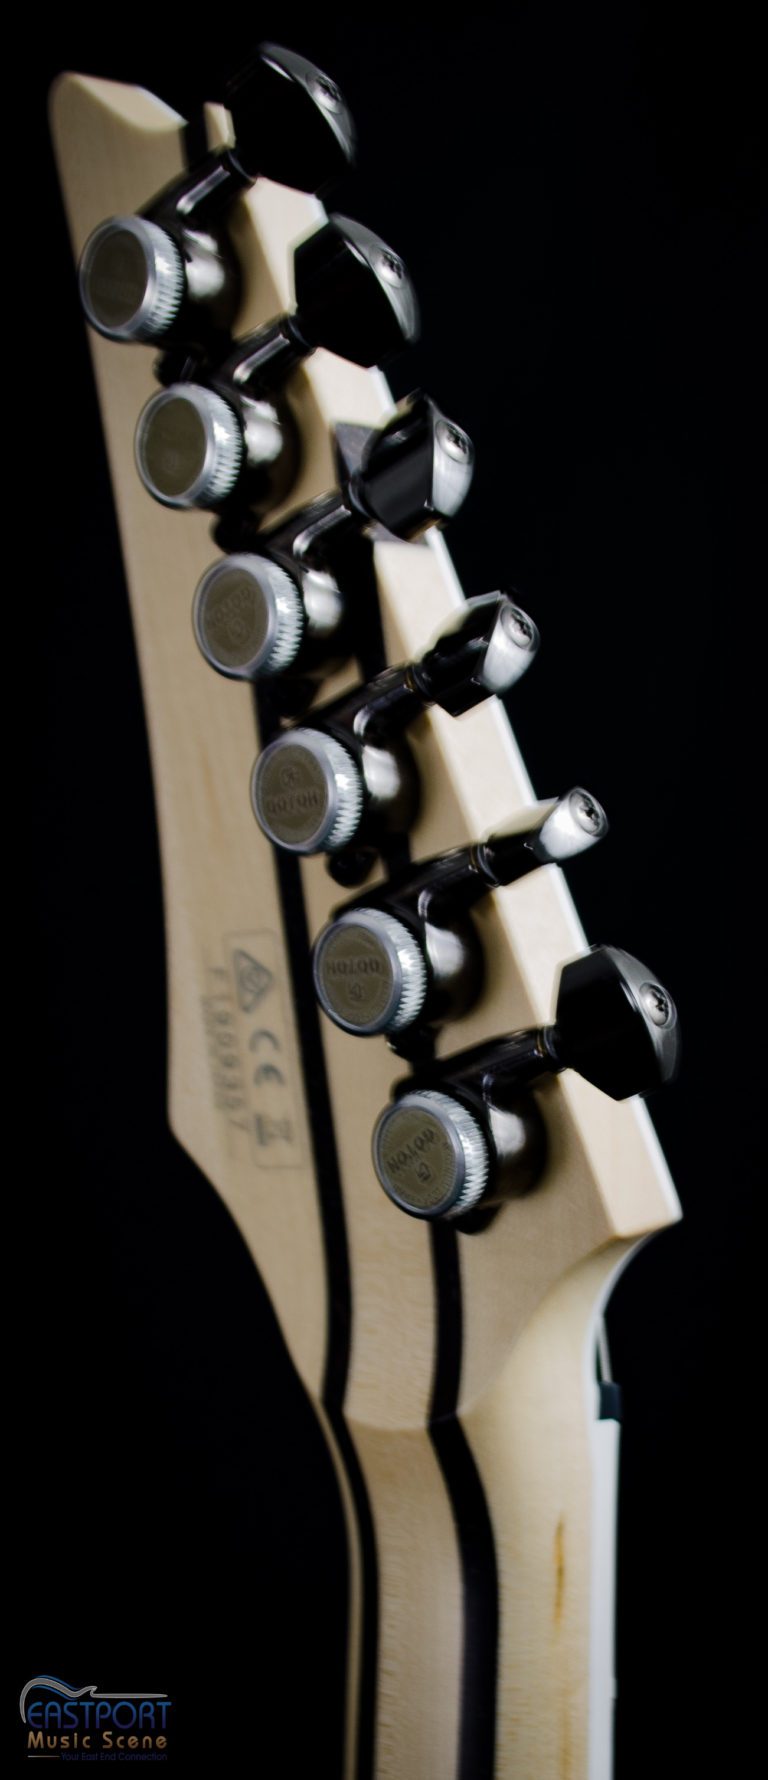 A guitar with six strings and three different types of tuners.